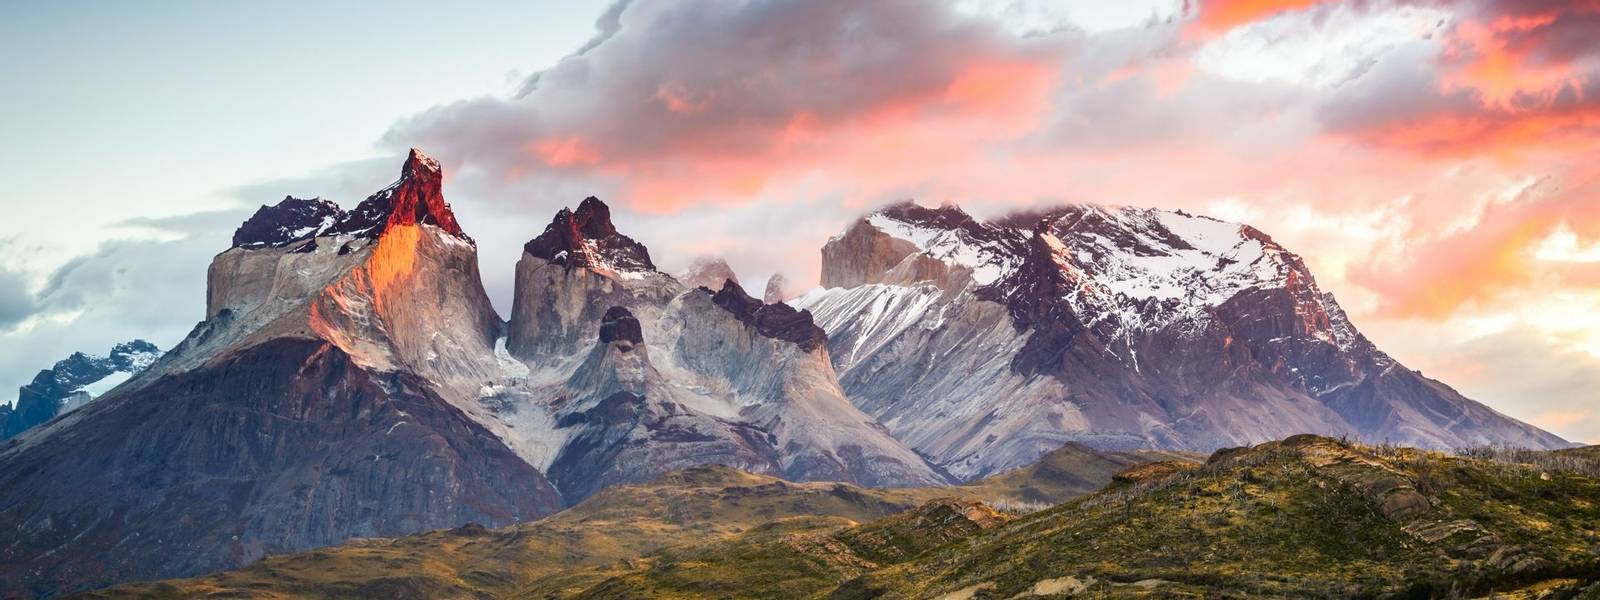 Patagonia, Chile - Torres del Paine, in the Southern Patagonian Ice Field, Magellanes Region of South America